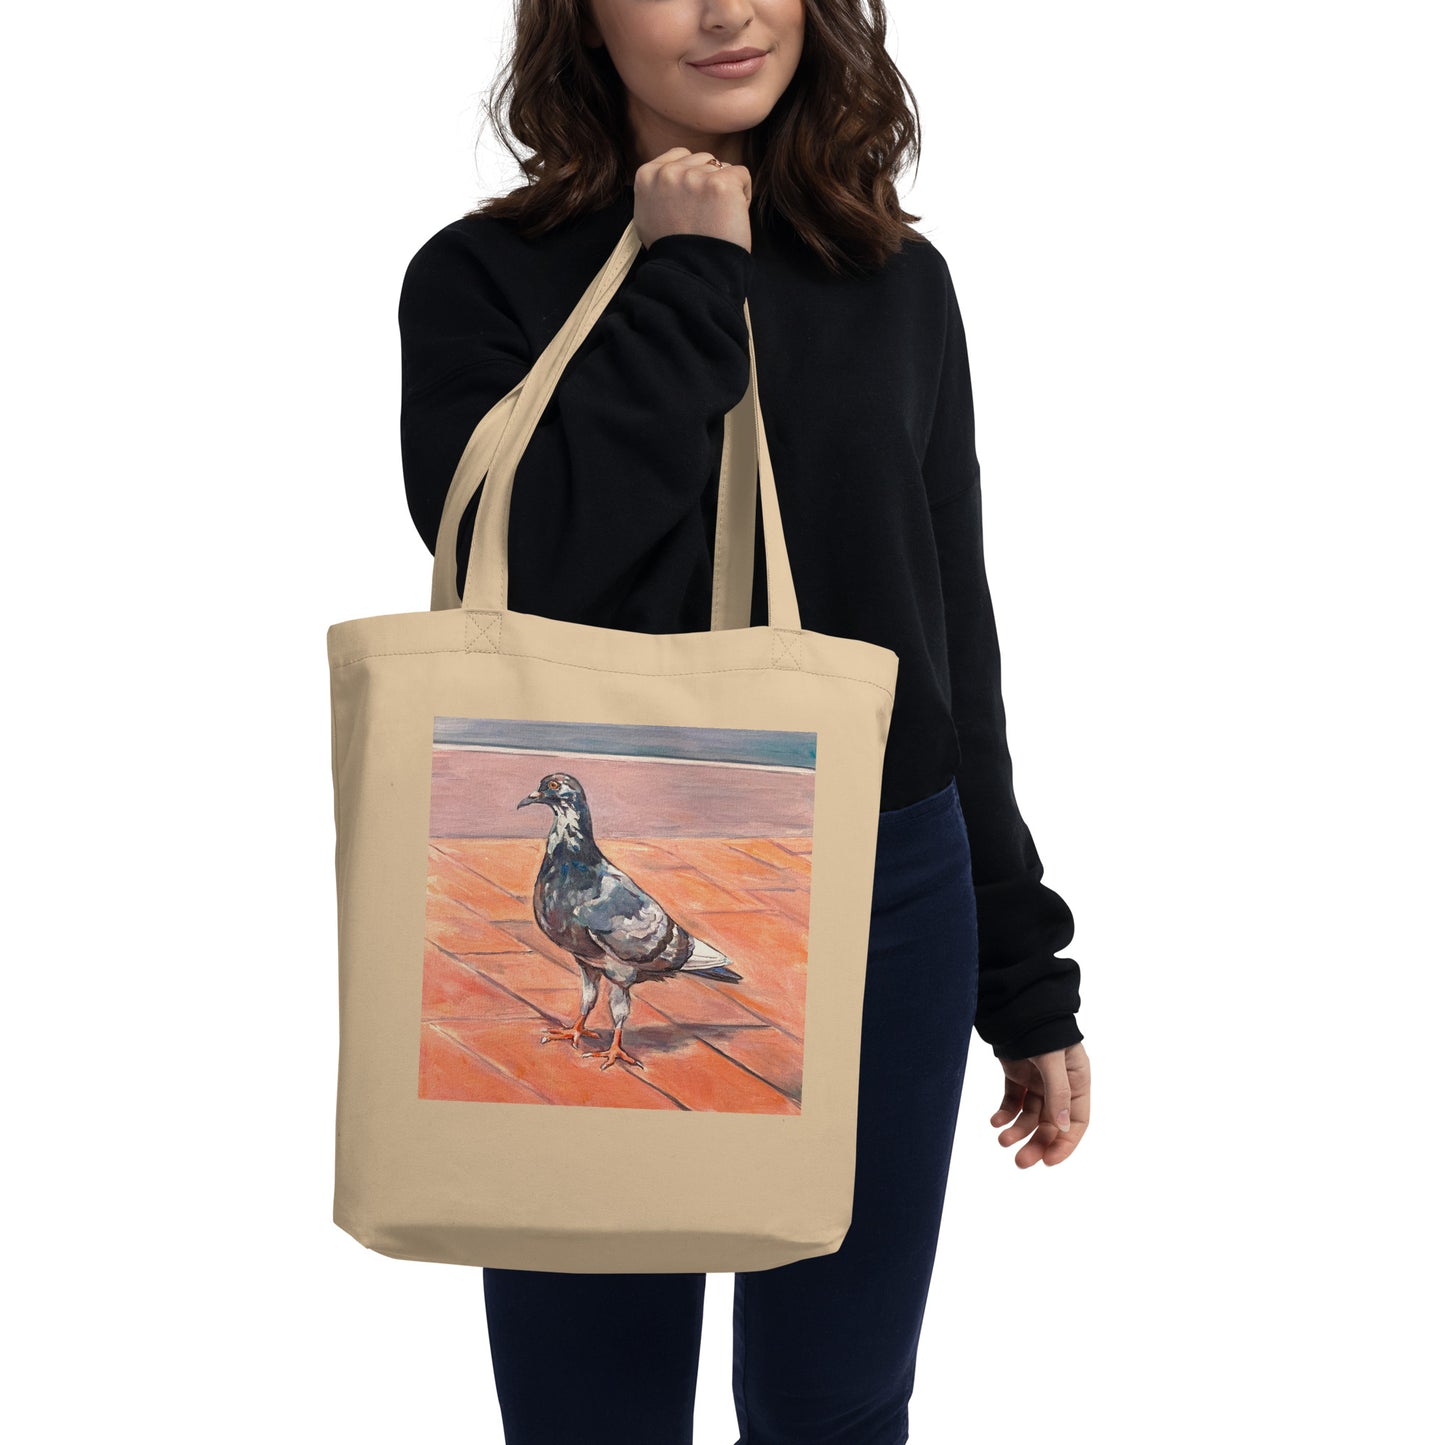 Eco Tote Bag - Pigeon from Soho, NYC